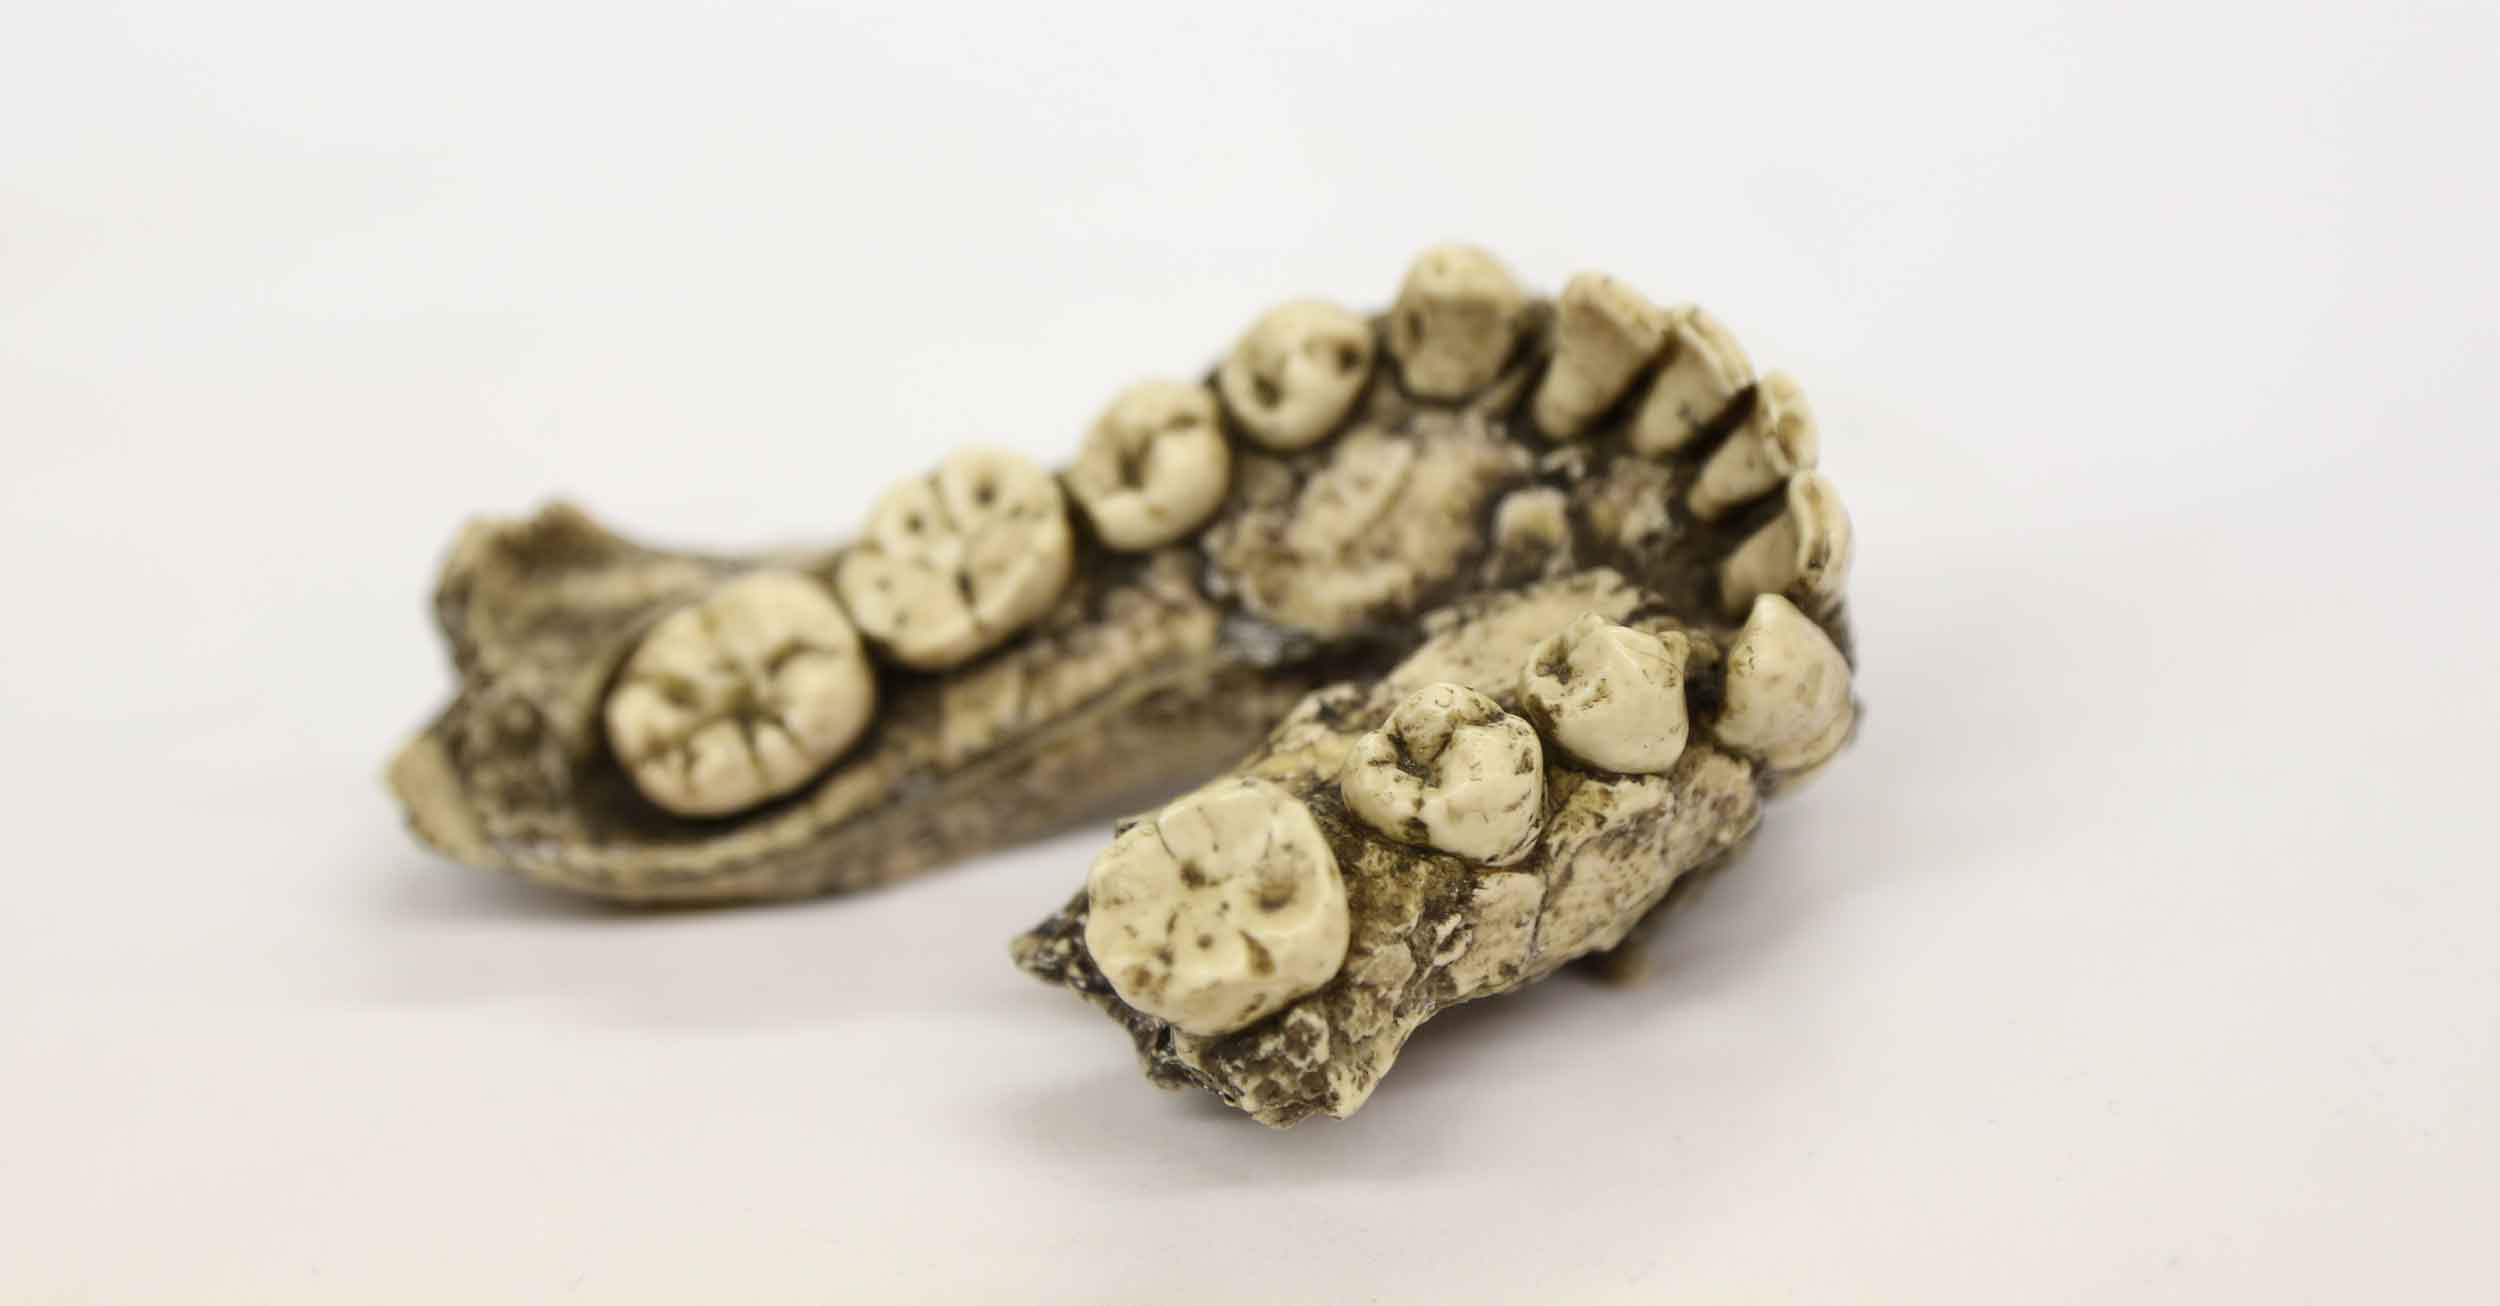 A cast of a fossil jawbone with most teeth present, taken from an angle